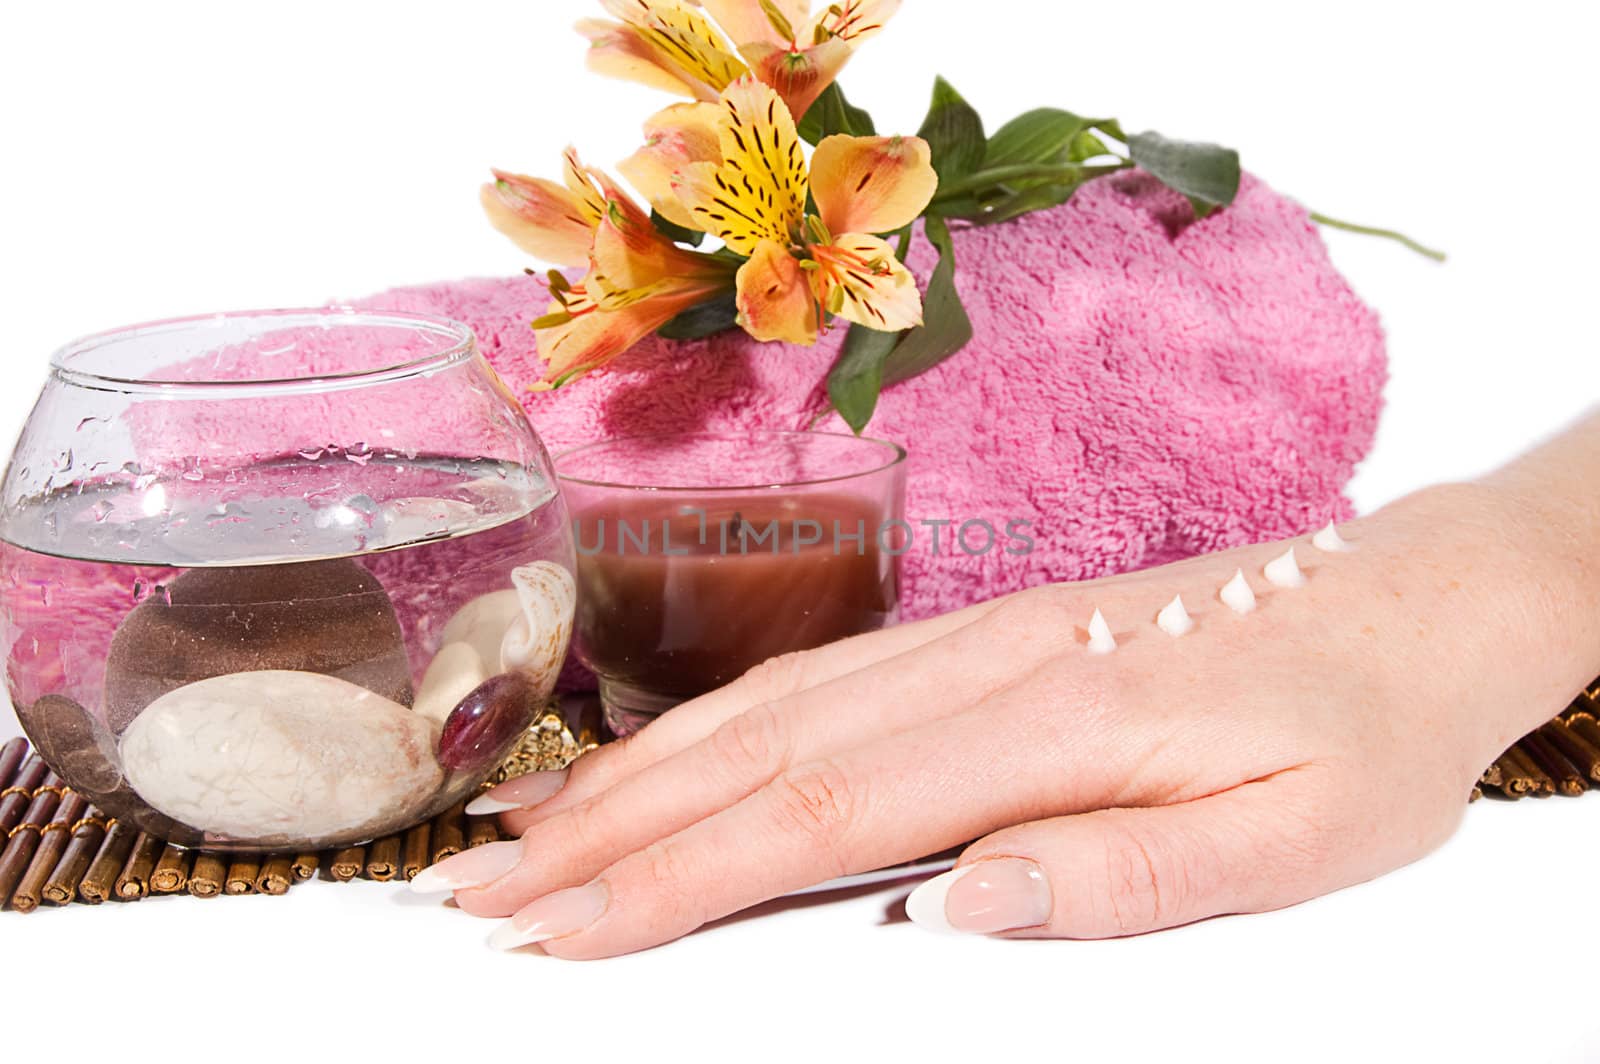 Woman hand with manicure and cream on spa treatment